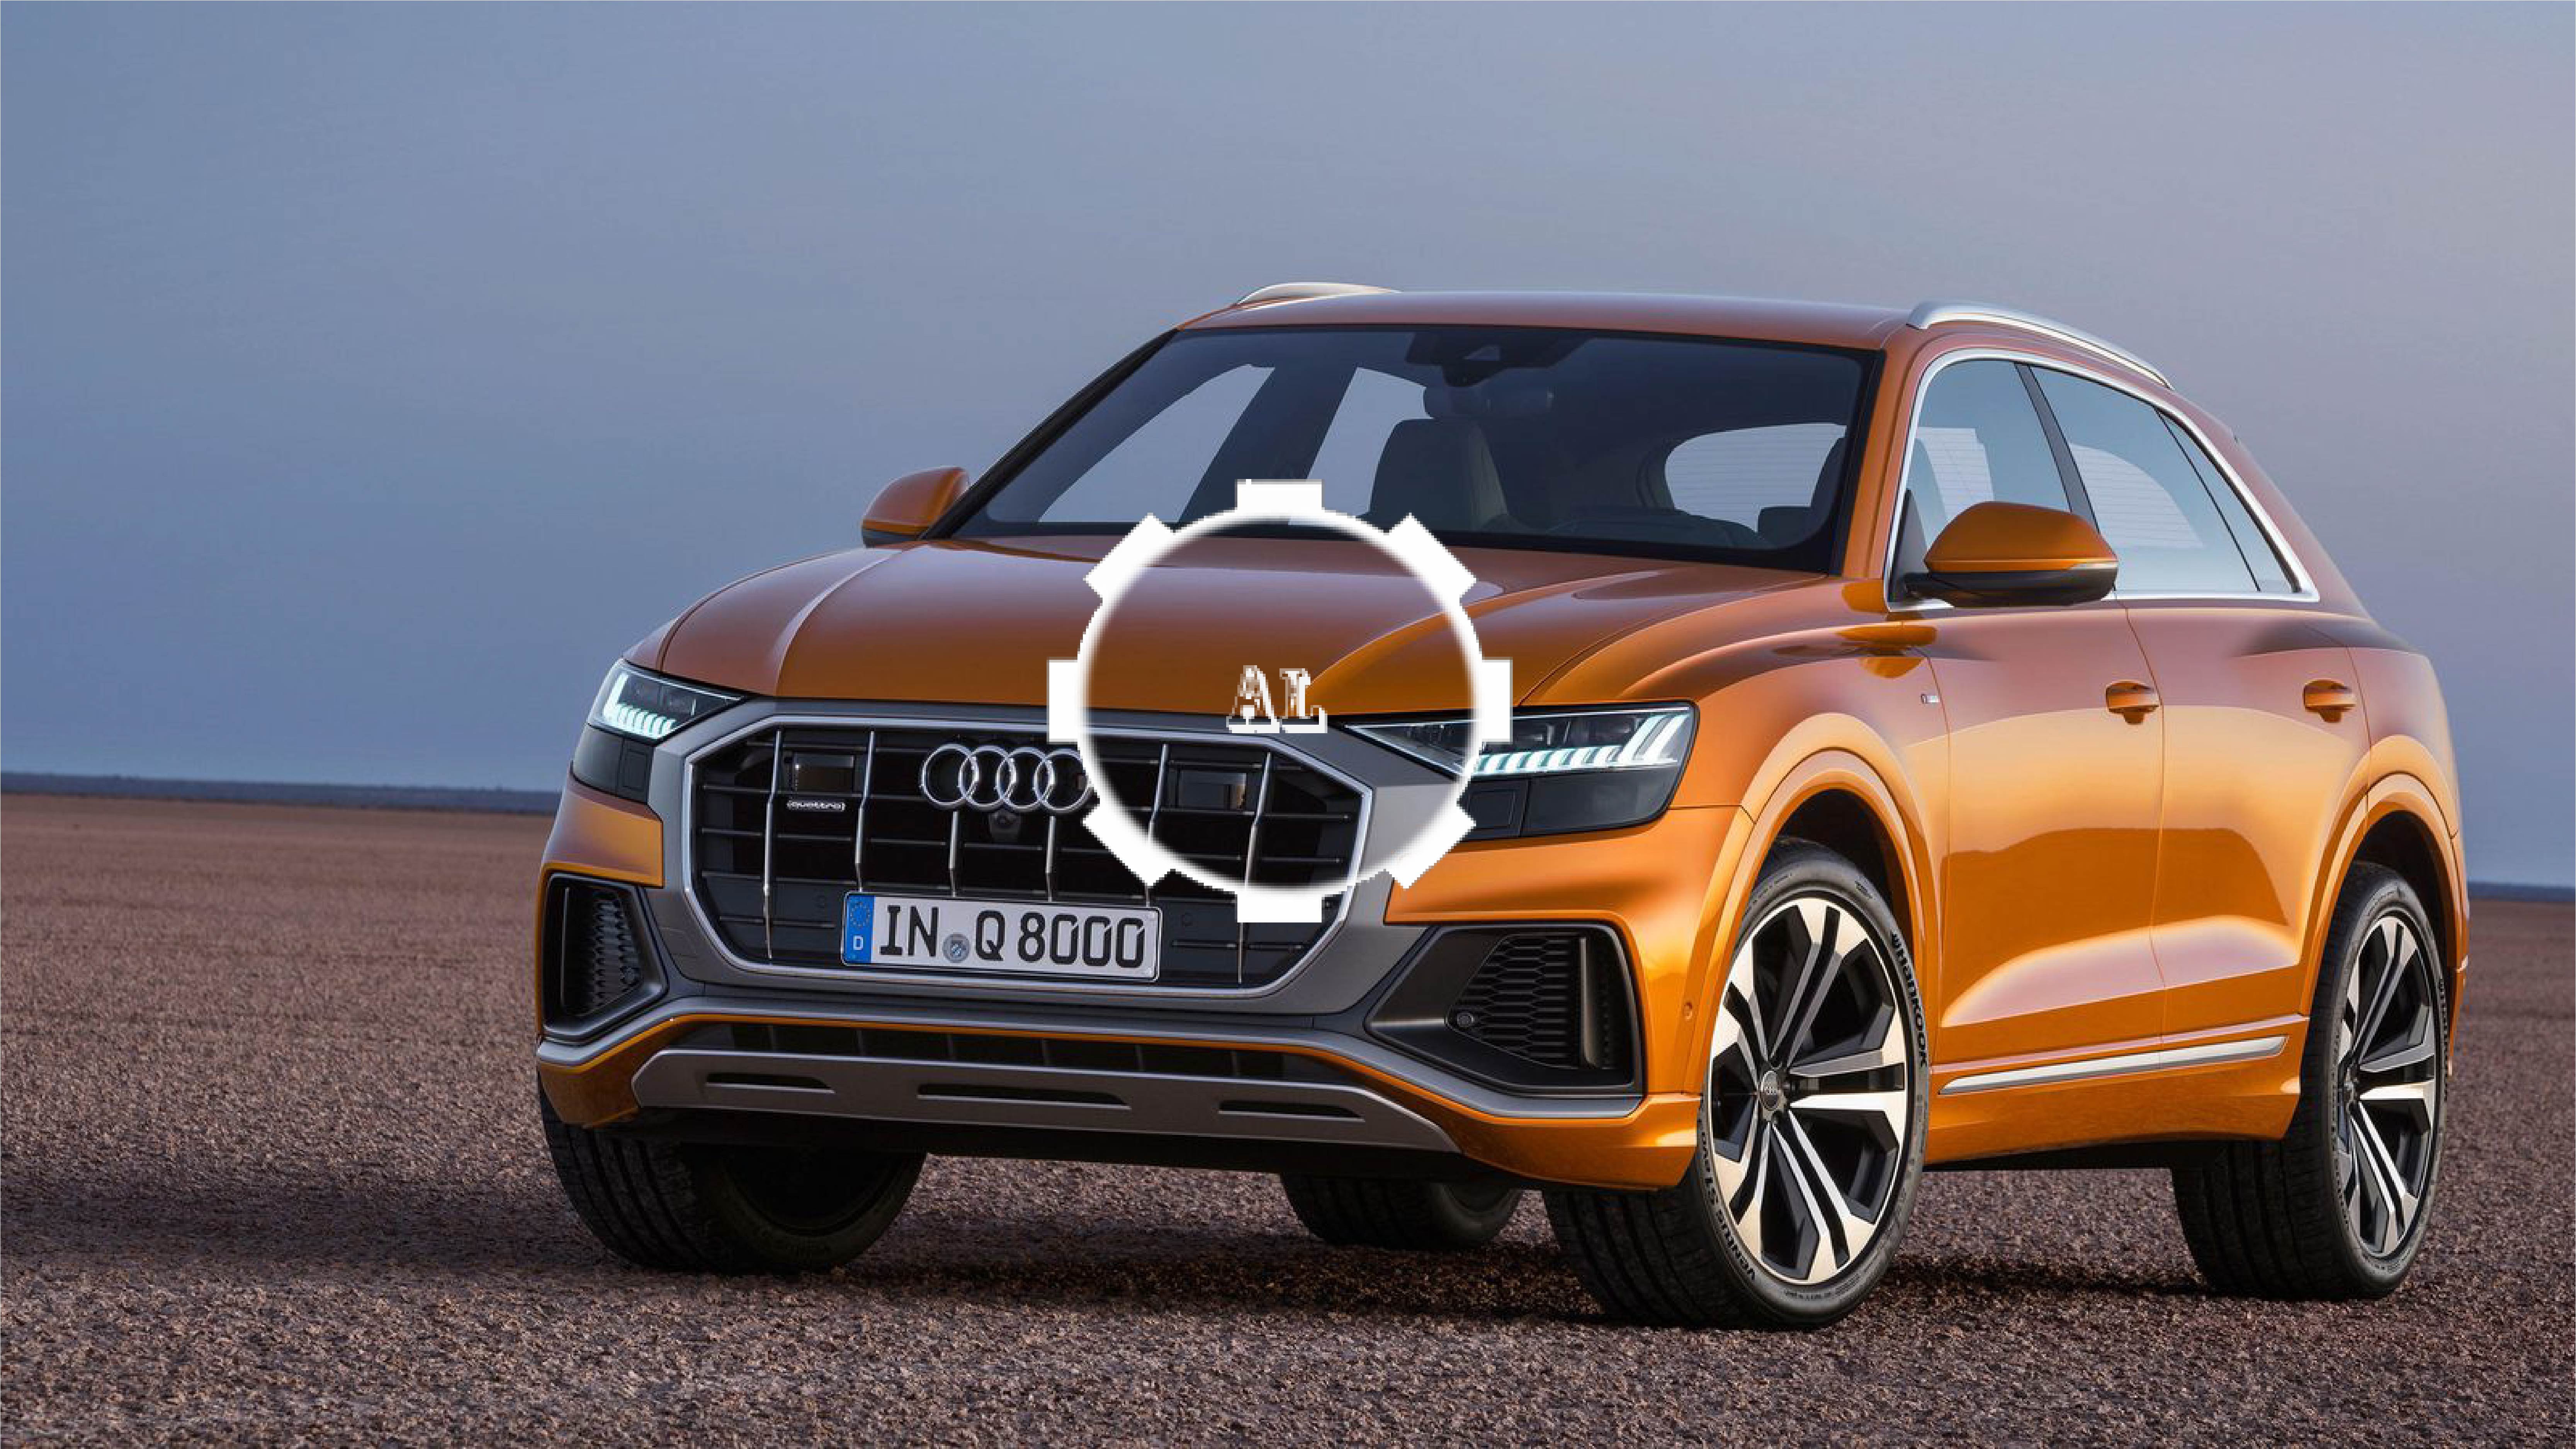 New Audi Q8 Suv Interior And Release Date Audi Lovers